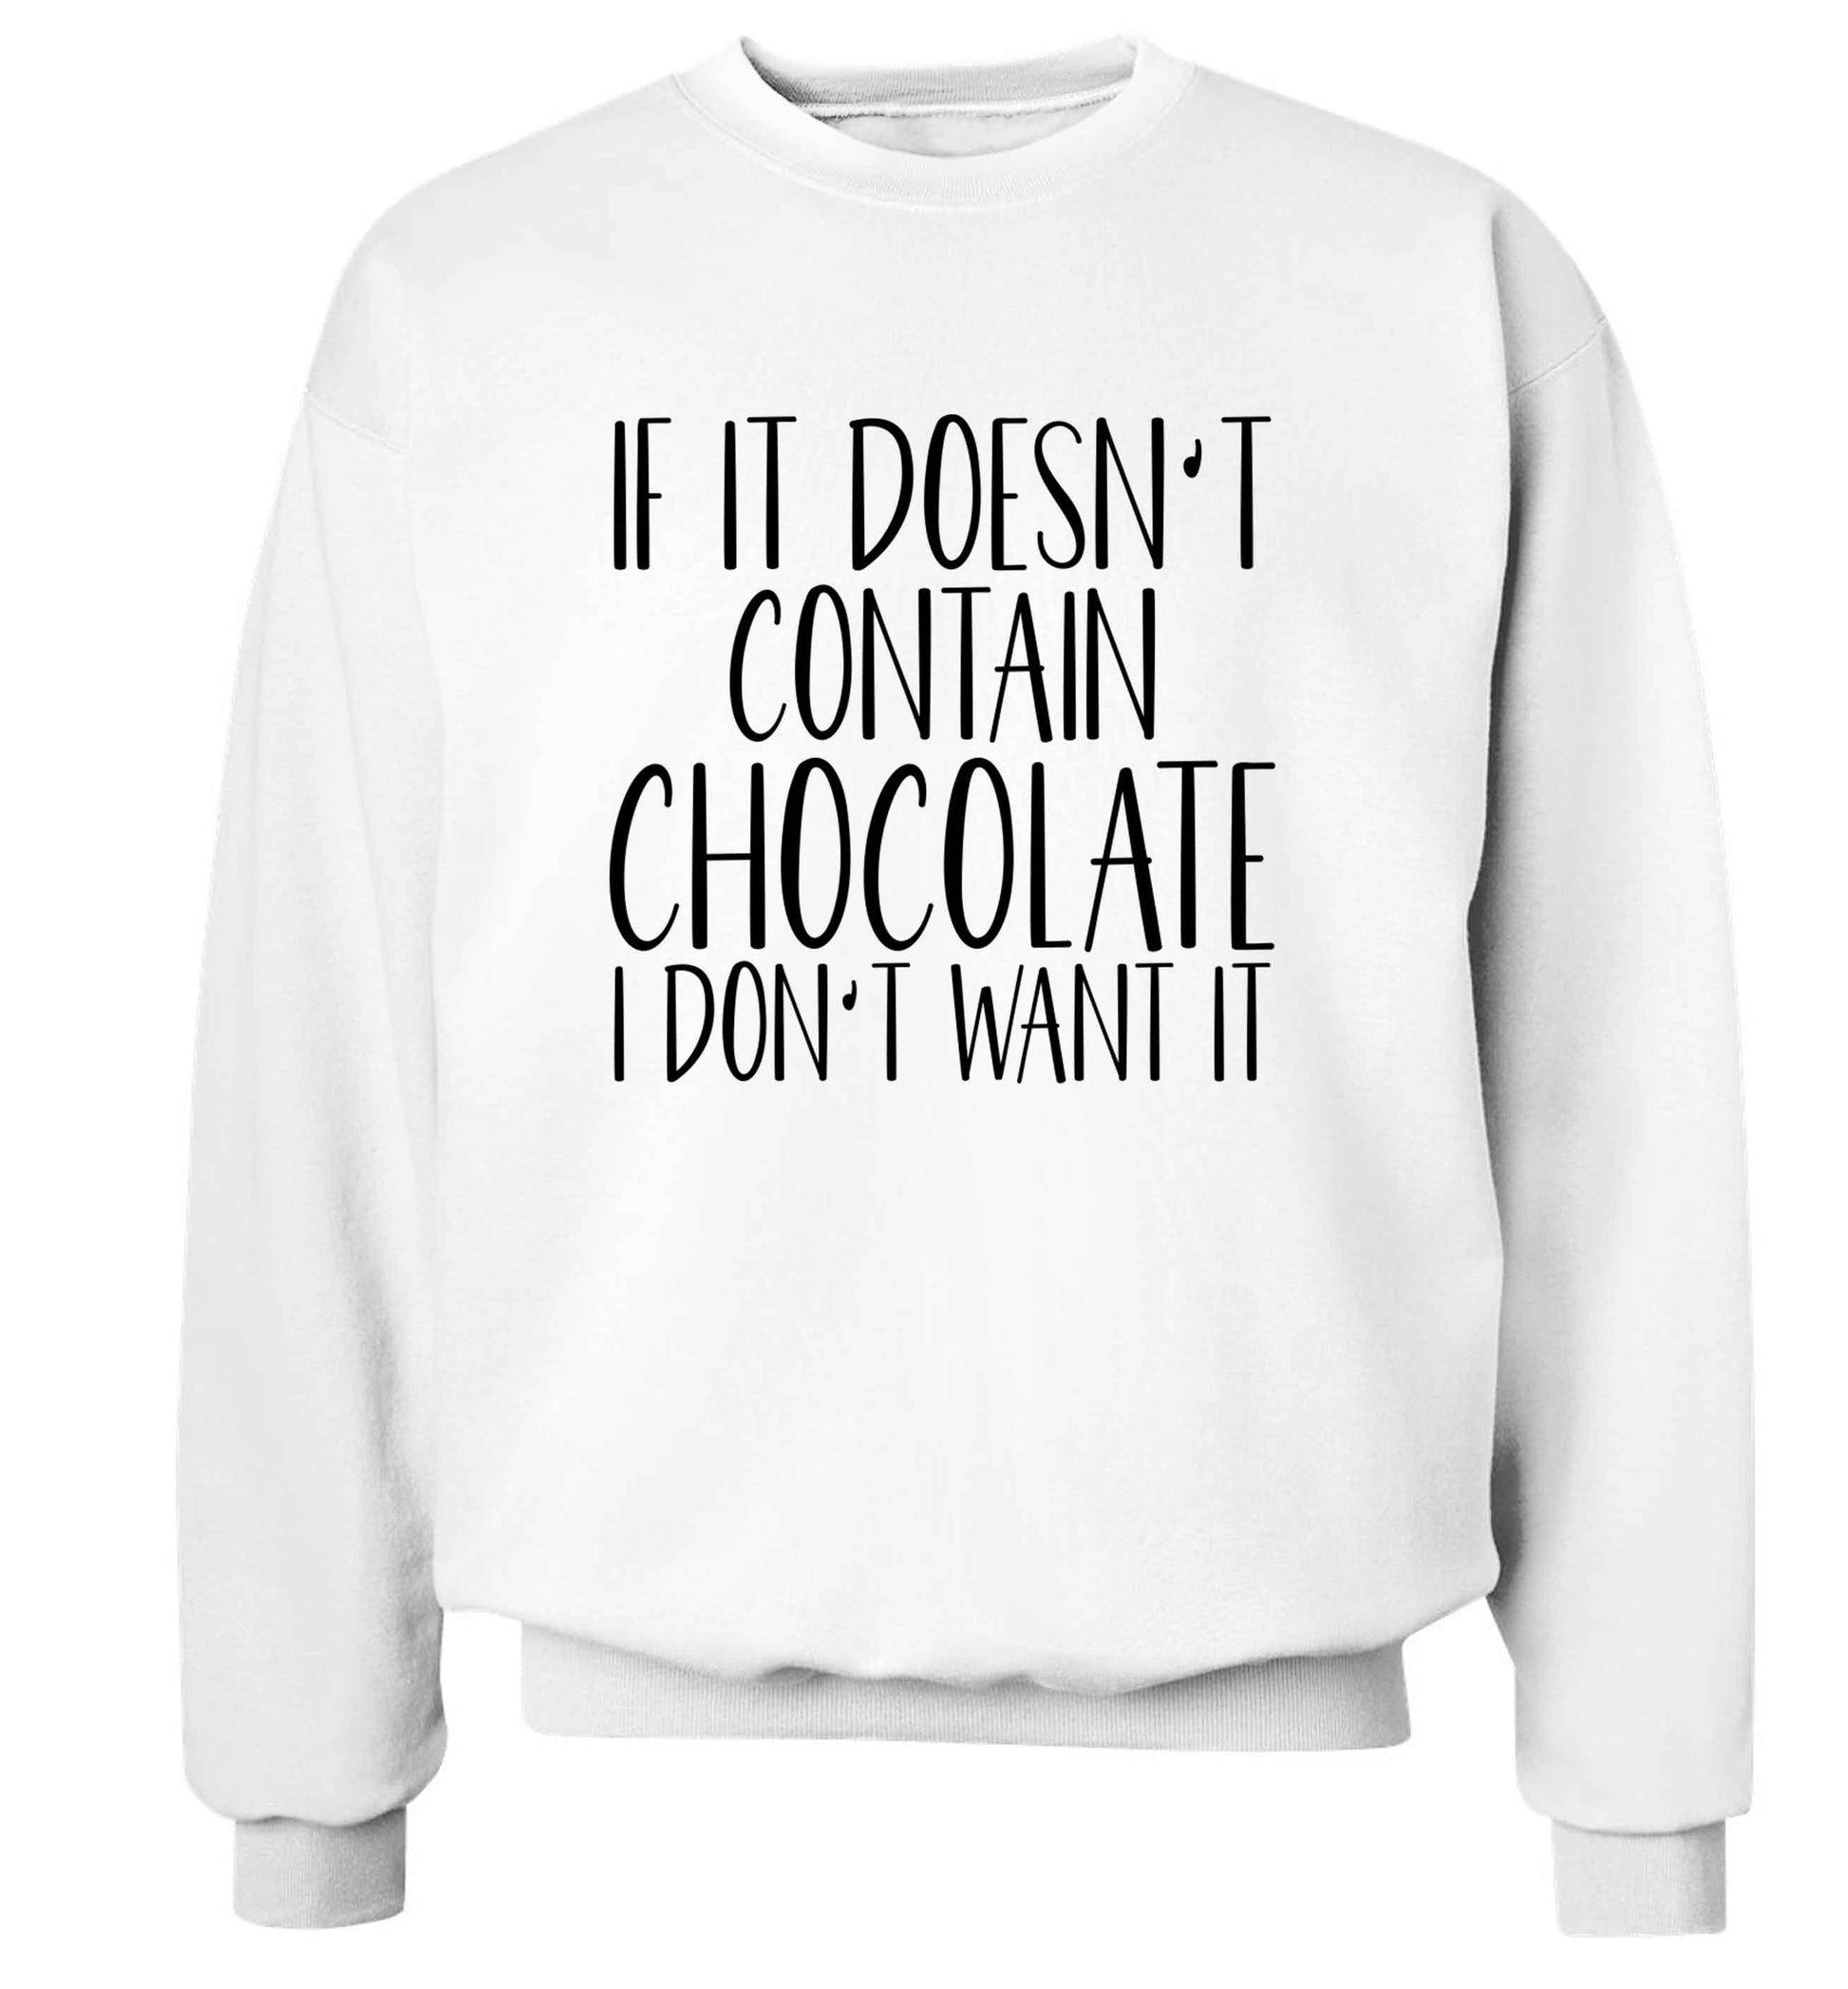 If it doesn't contain chocolate I don't want it adult's unisex white sweater 2XL